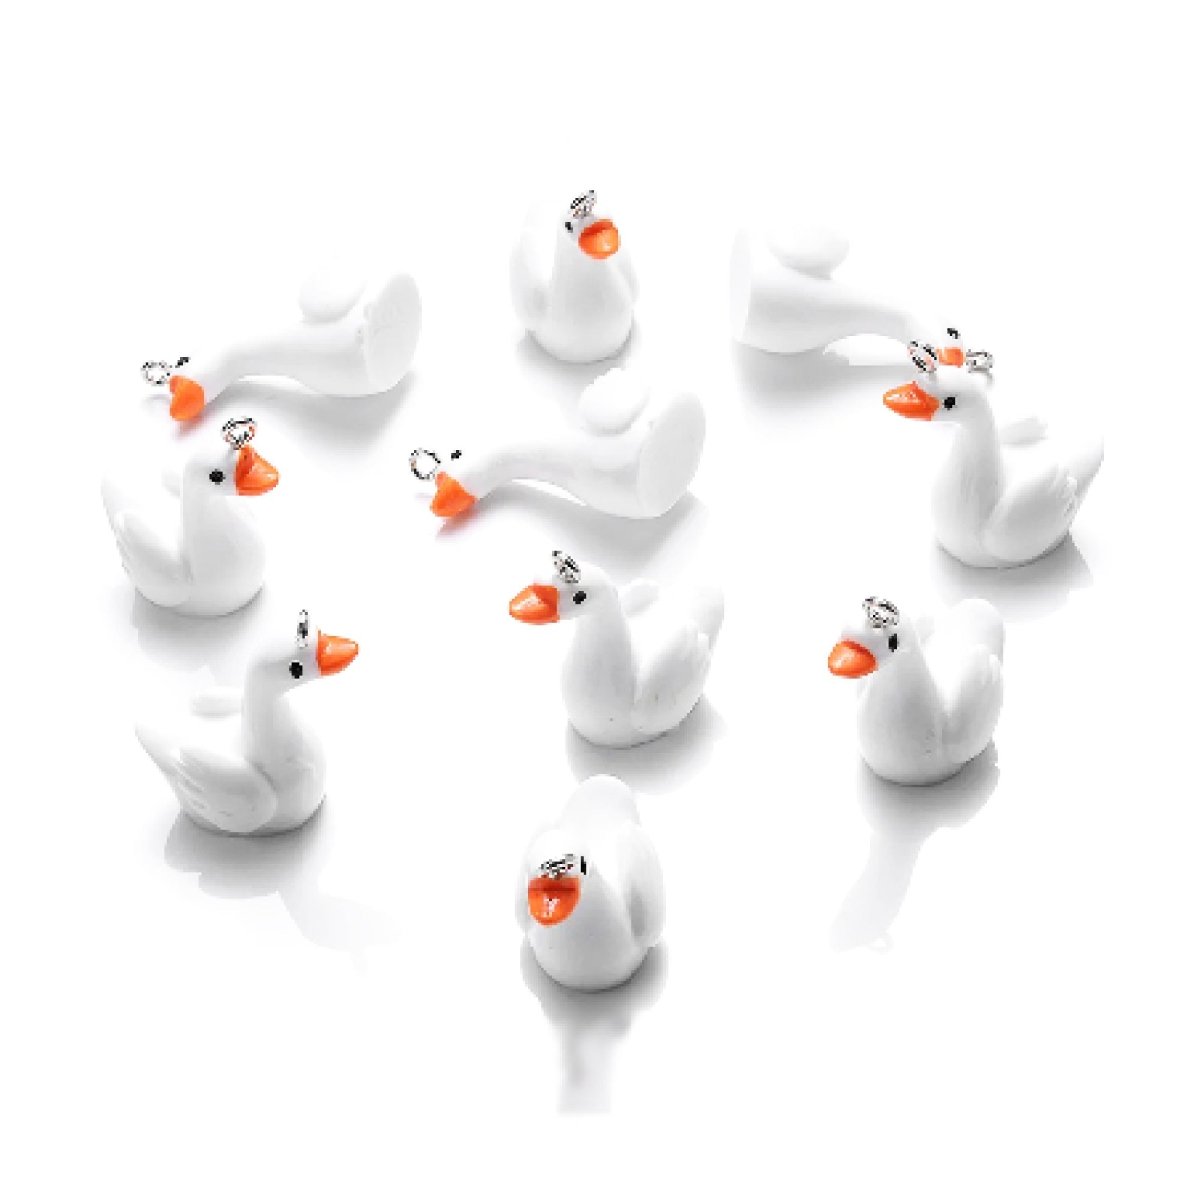 10pcs Miniature Mini Garden Animal Figurines Charms with Loop Pendant Craft - Swans - Asia Sell